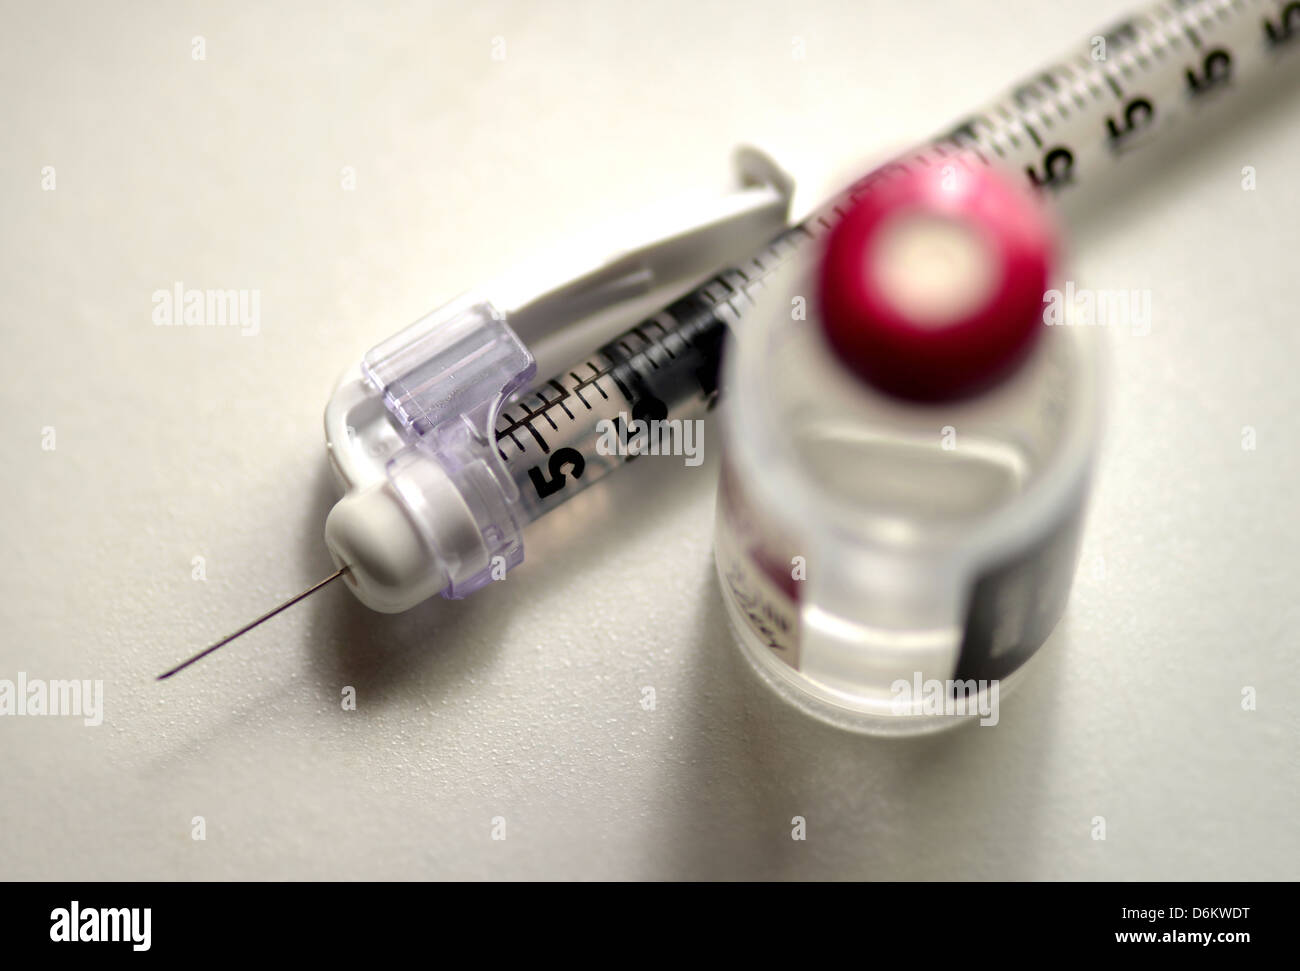 A syringe and insulin, which is used to treat diabetes. Stock Photo